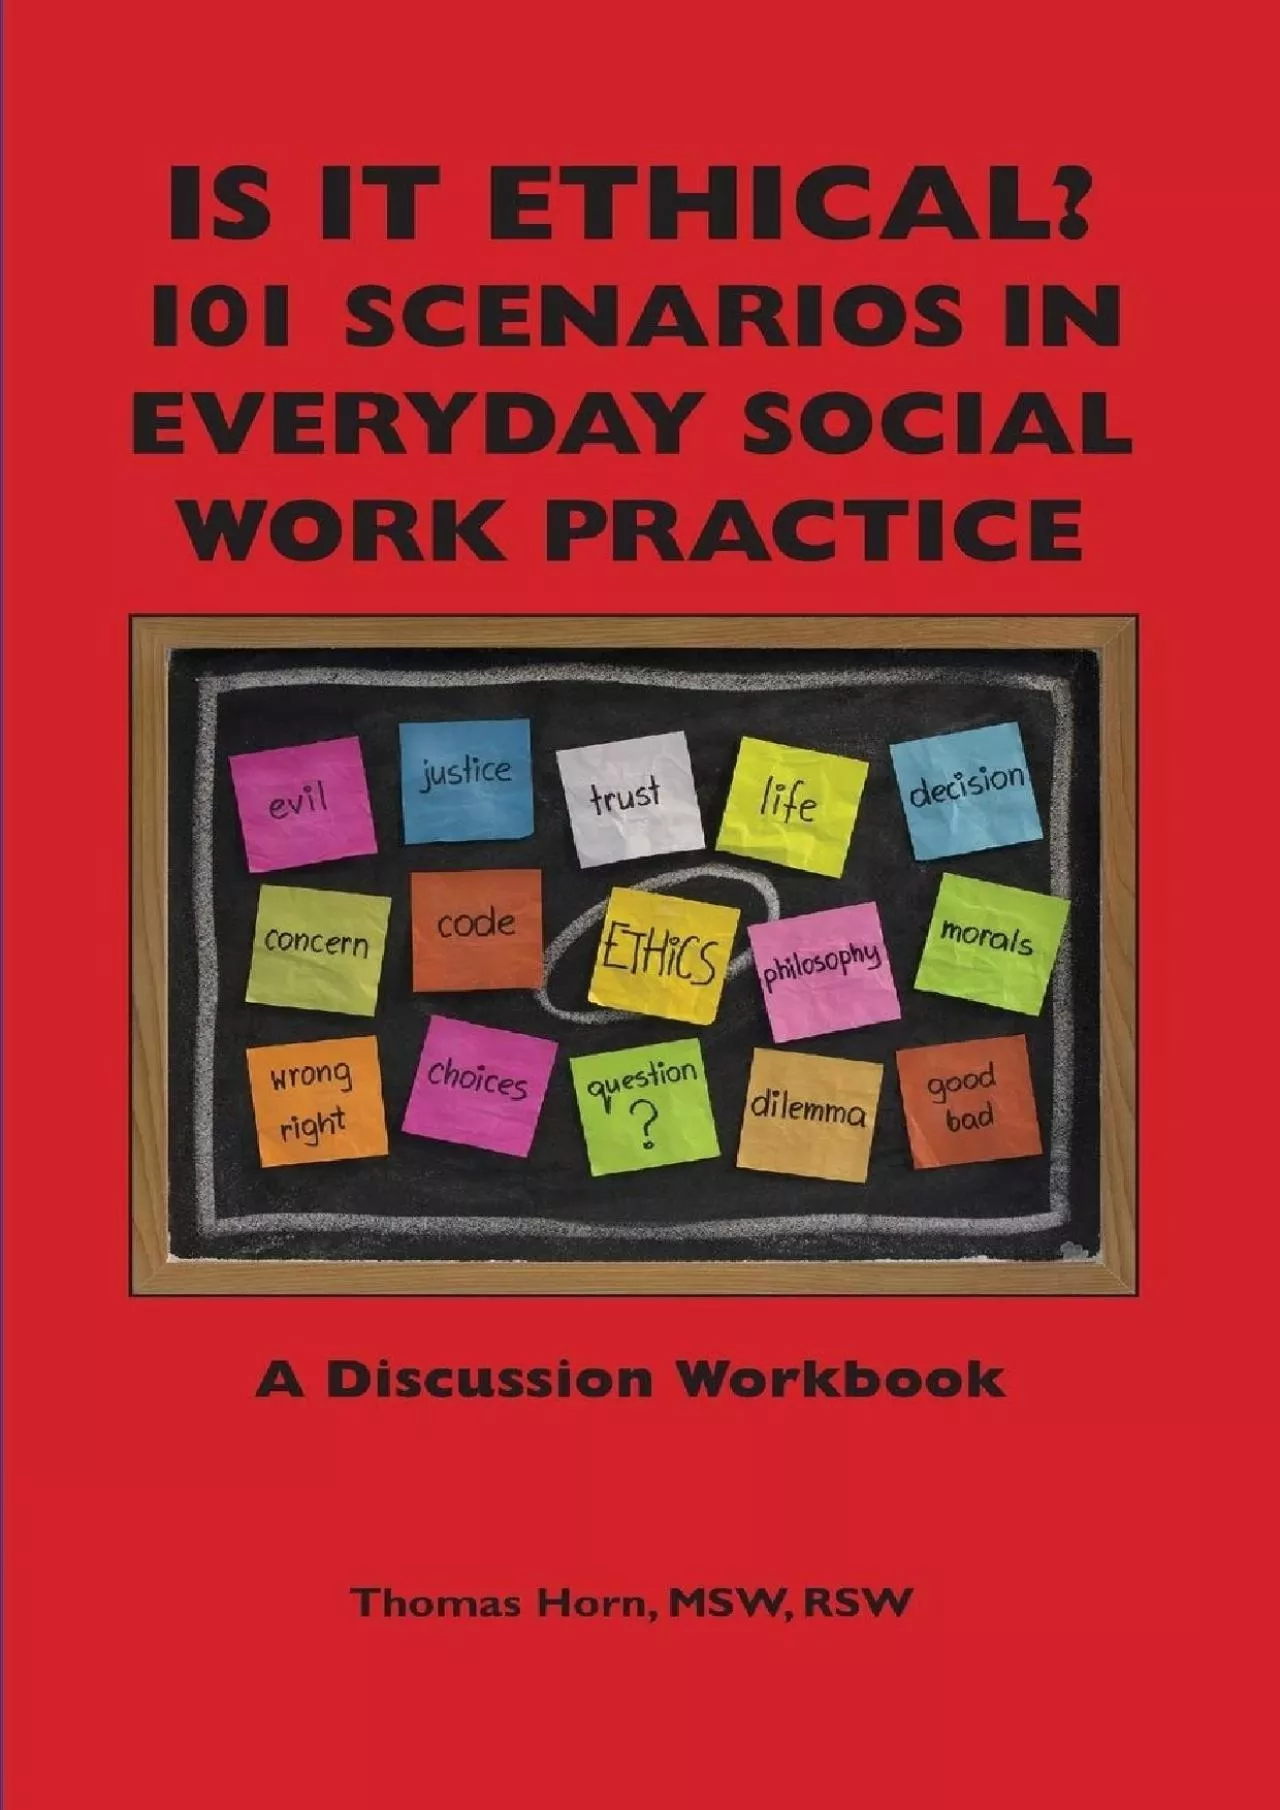 (DOWNLOAD)-Is It Ethical? 101 Scenarios in Everyday Social Work Practice: A Discussion